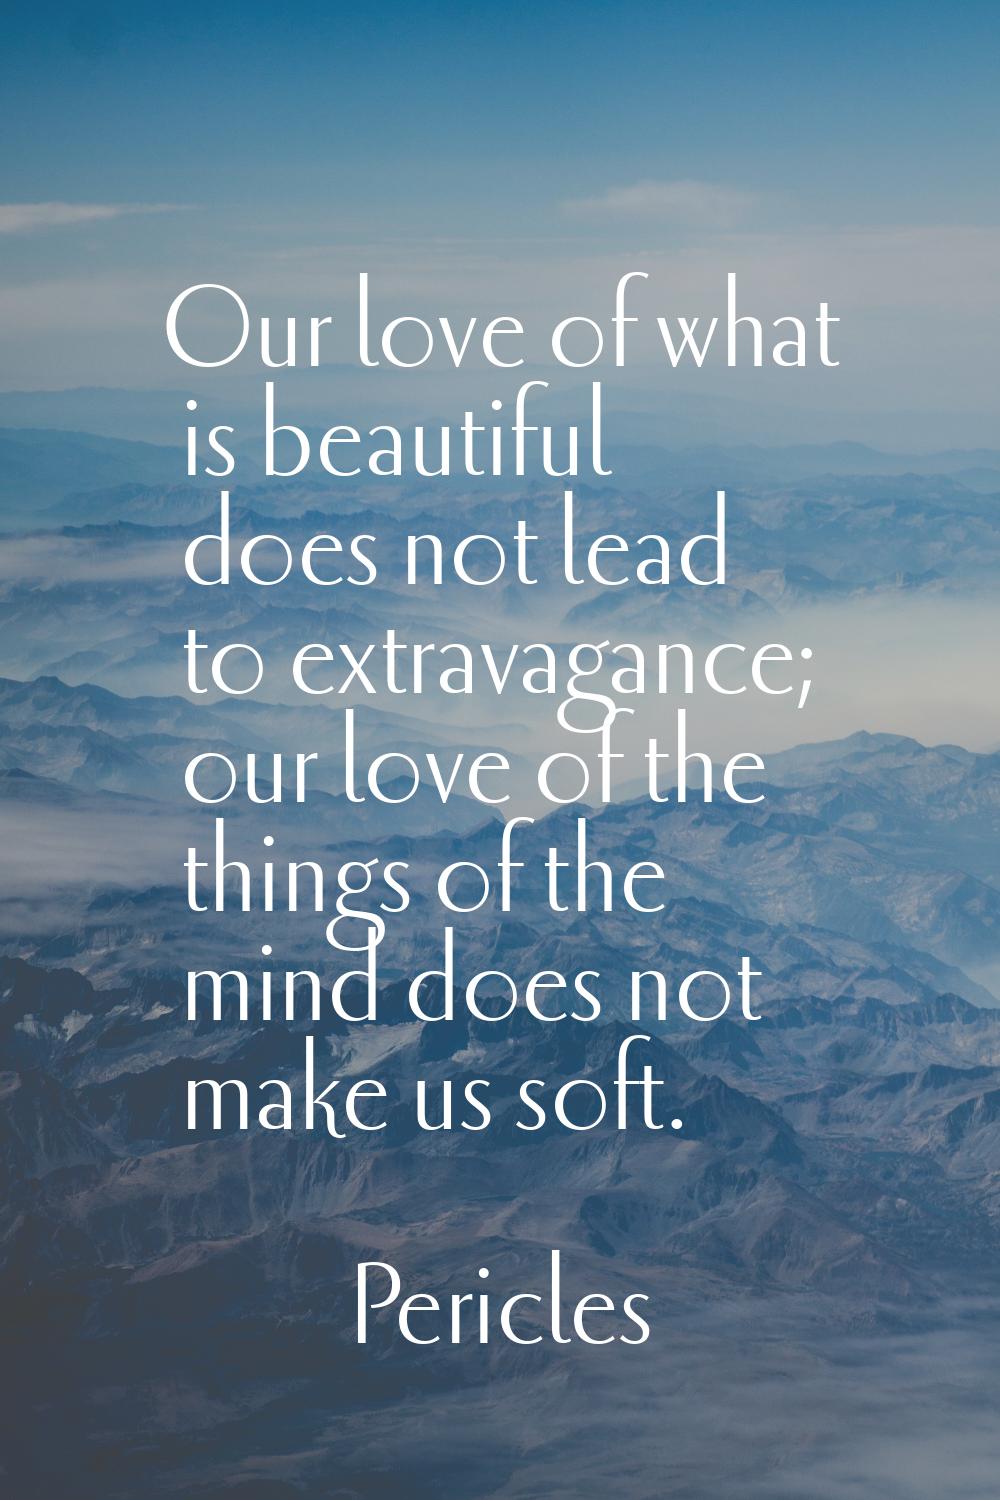 Our love of what is beautiful does not lead to extravagance; our love of the things of the mind doe